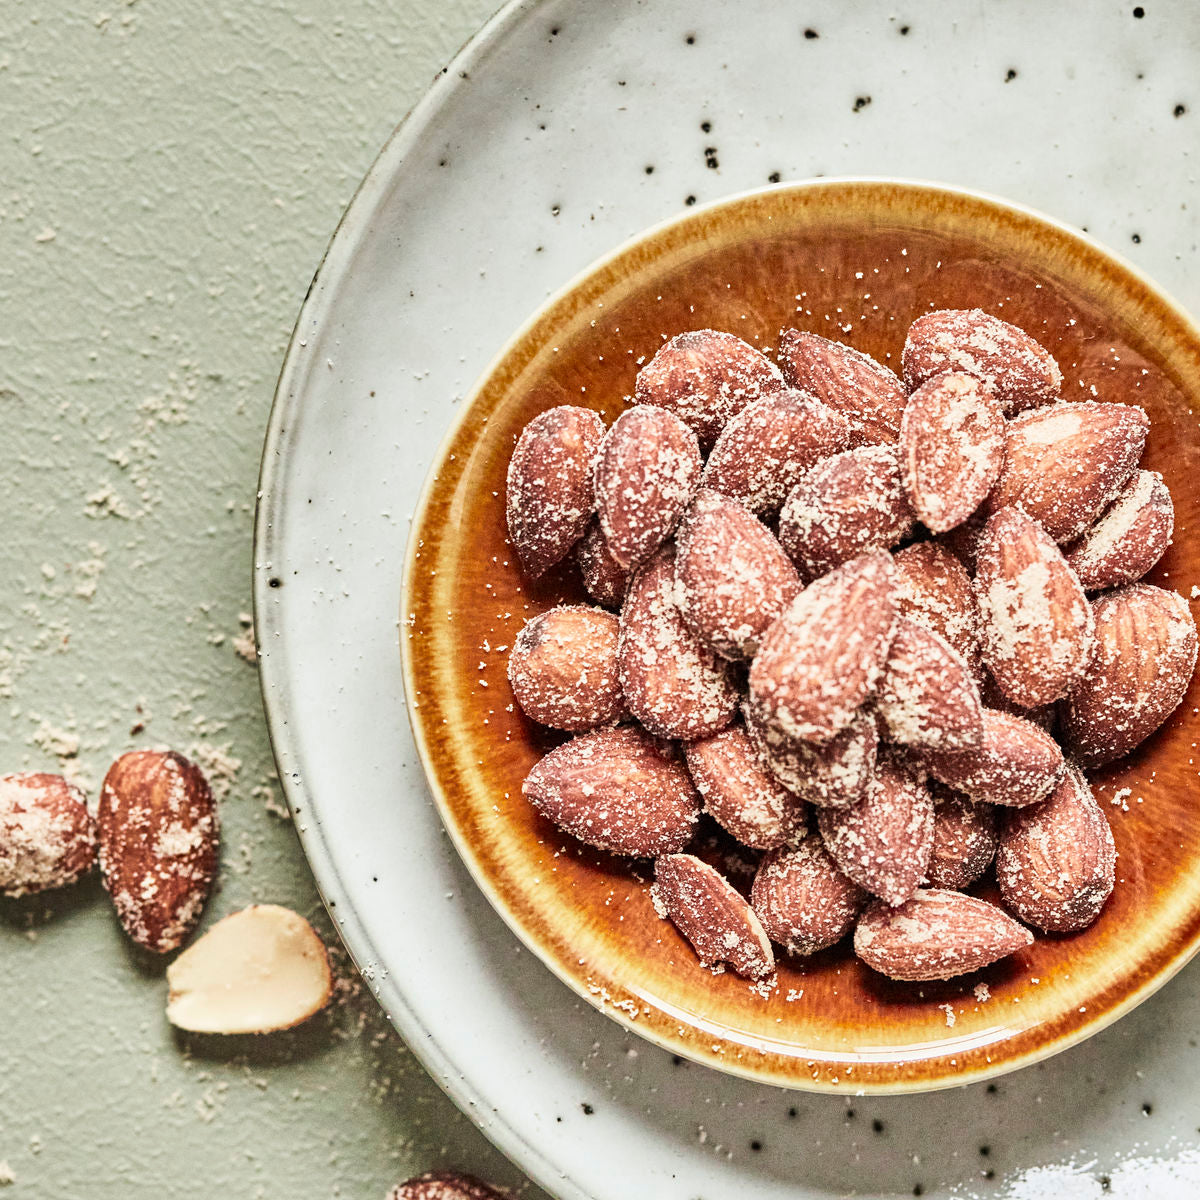 Smoked Almonds, roasted & salted